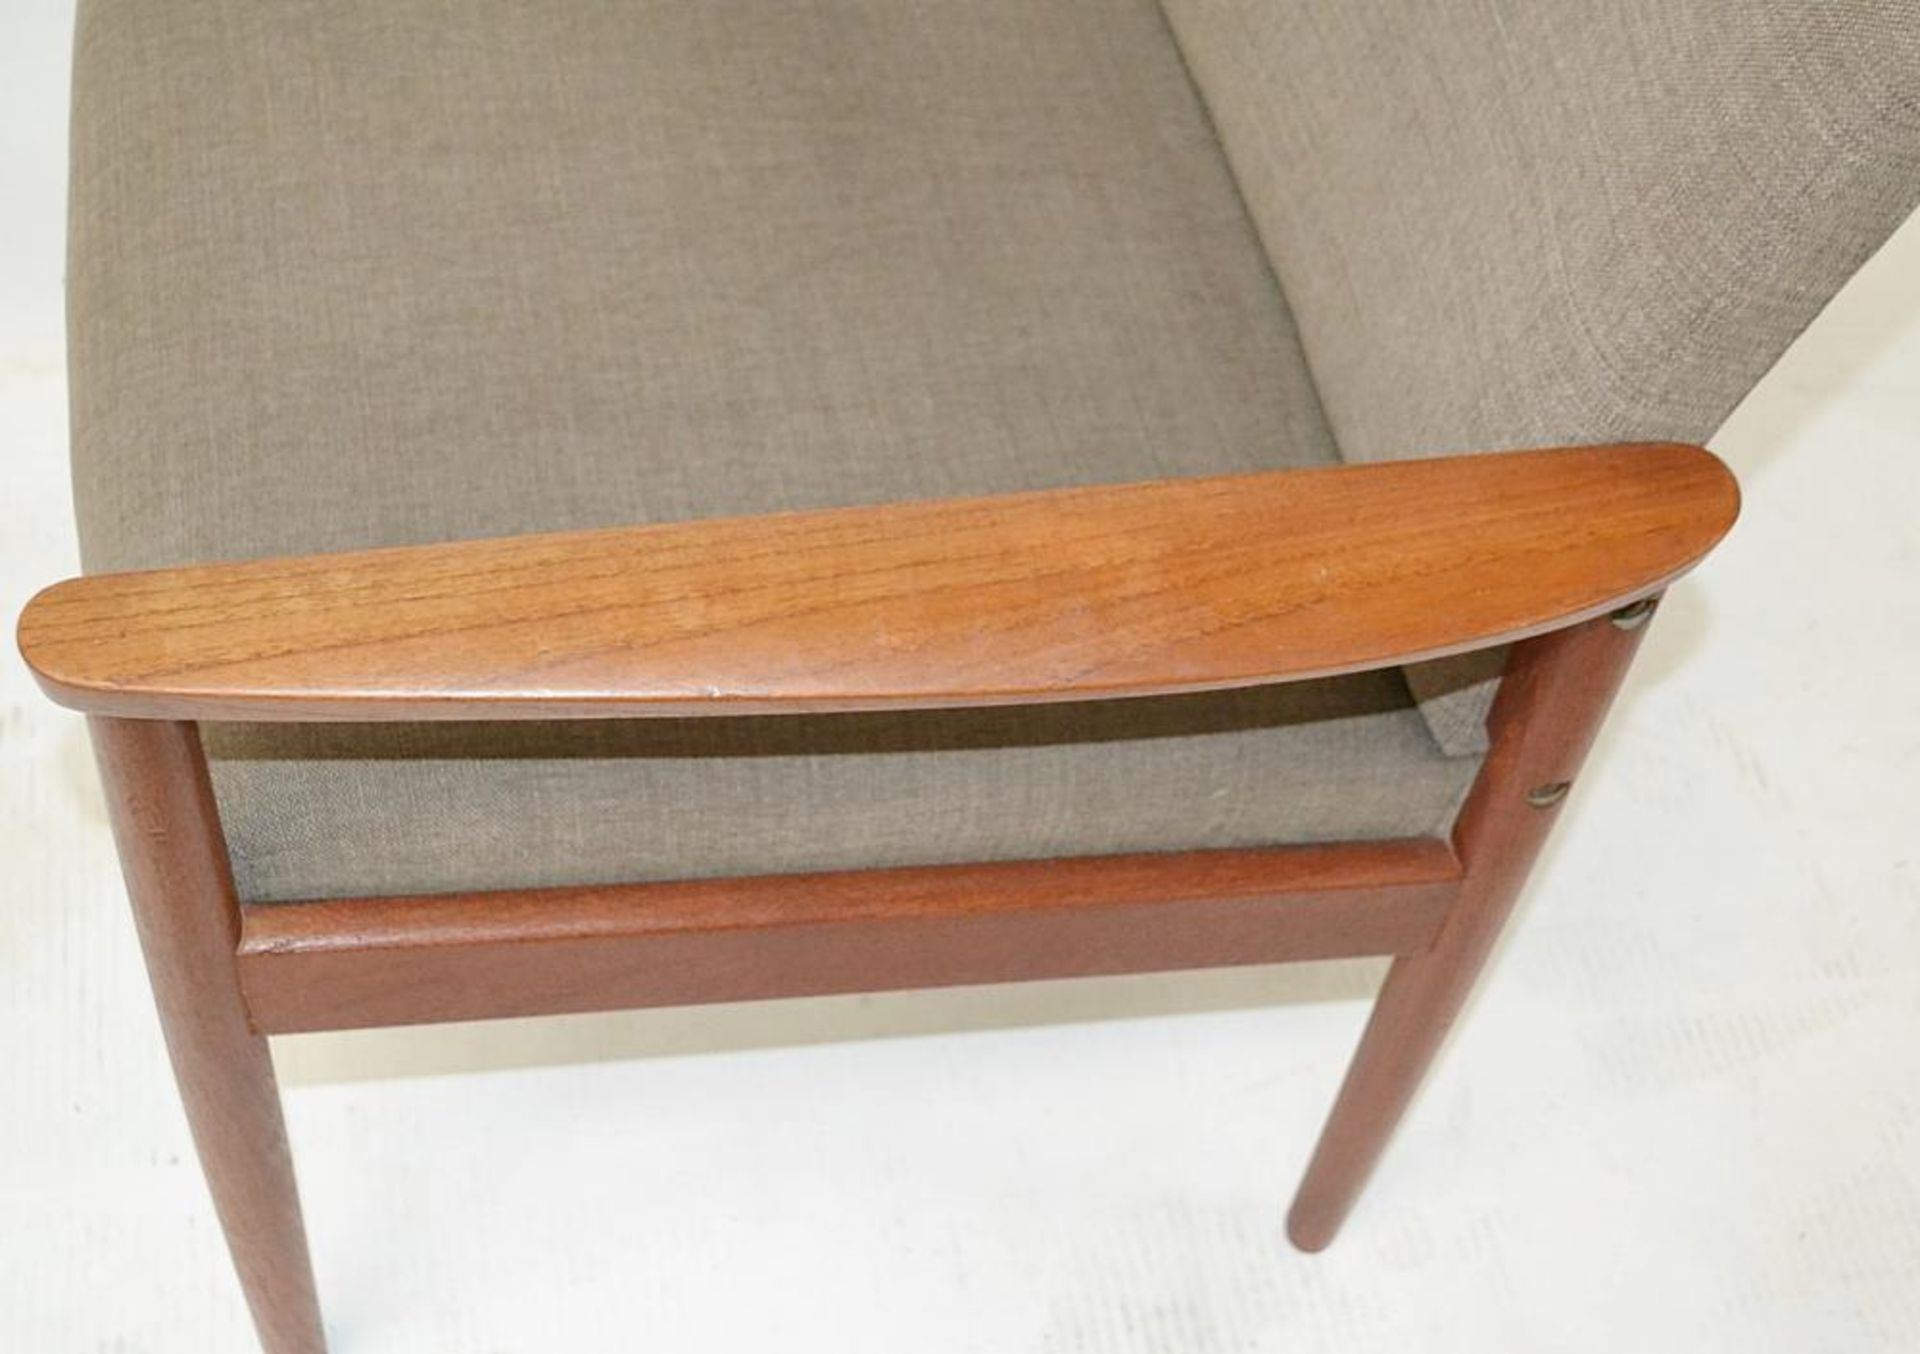 1 x JAB King Upholstery Mid Century Chair Hot Madison Reloaded Fab - Dimensions (approx): W68 x D57, - Image 6 of 6